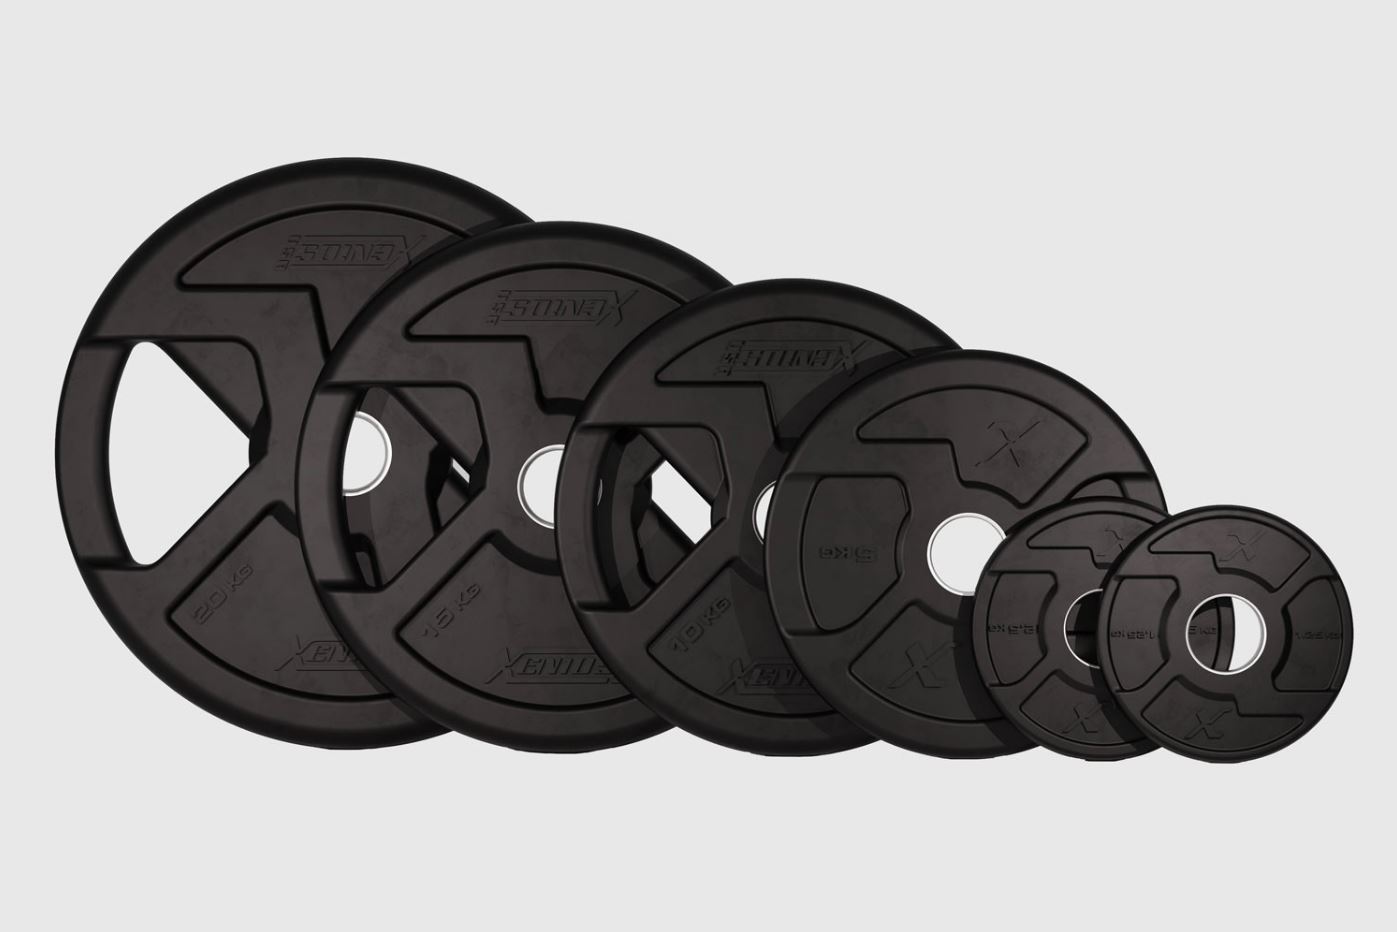 Xenios Black Rubber X-Grips Olympic Plate (SALE!)